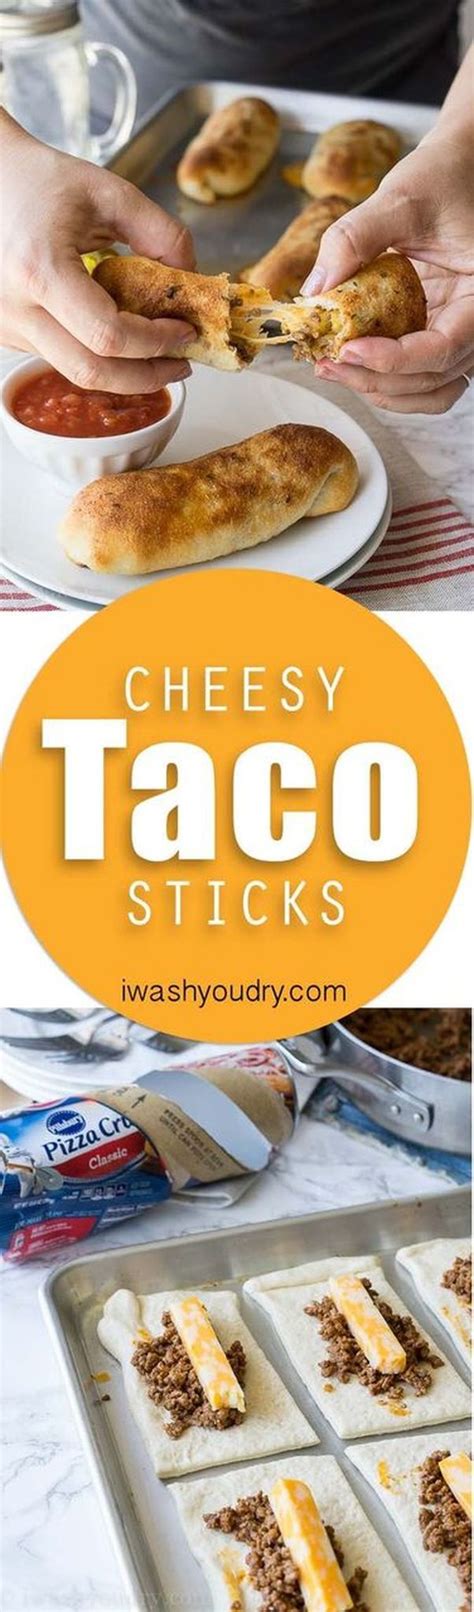 Combine the butter, garlic powder, and dry parsley, then generously brush over top of the taco breadsticks. CHEESY TACO STICKS - 1 Dozen | Food recipes, Food, Mexican ...